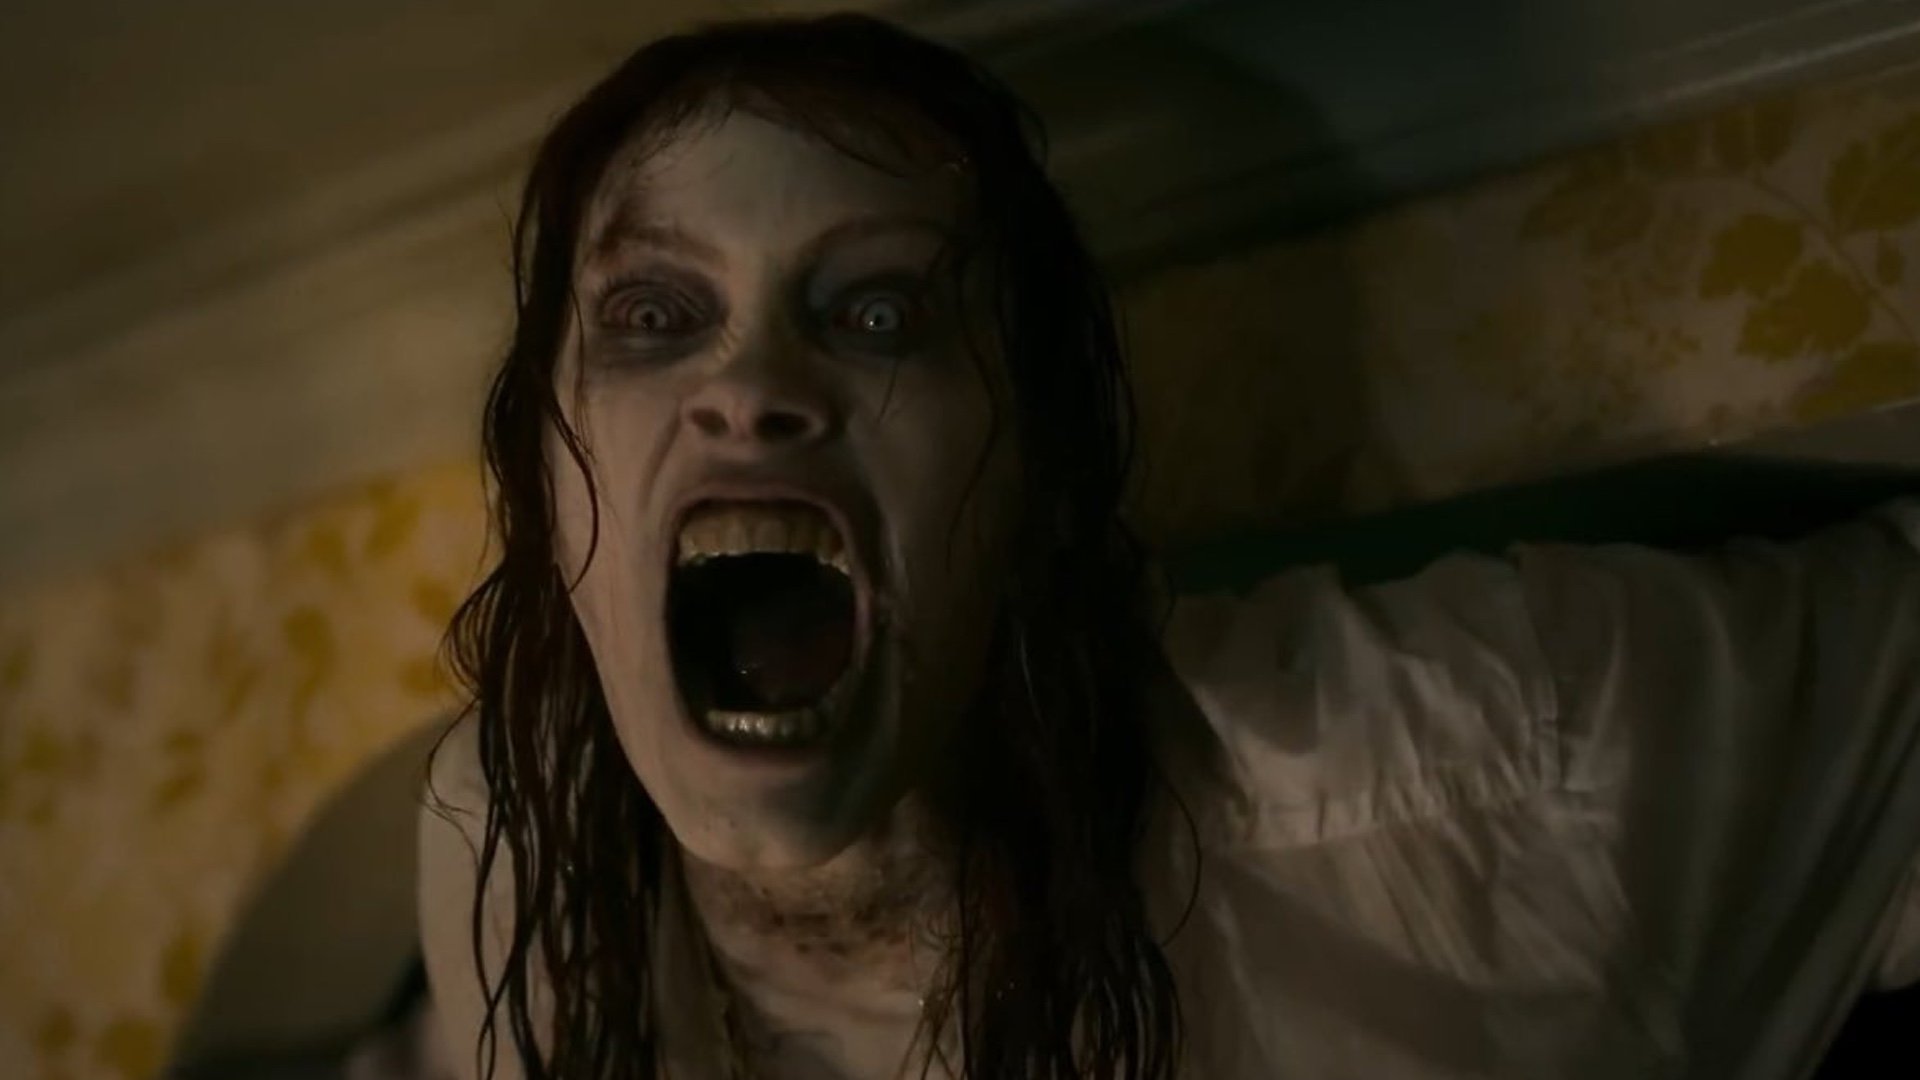 Review: EVIL DEAD RISE Takes Audiences on a Terrifying Blood